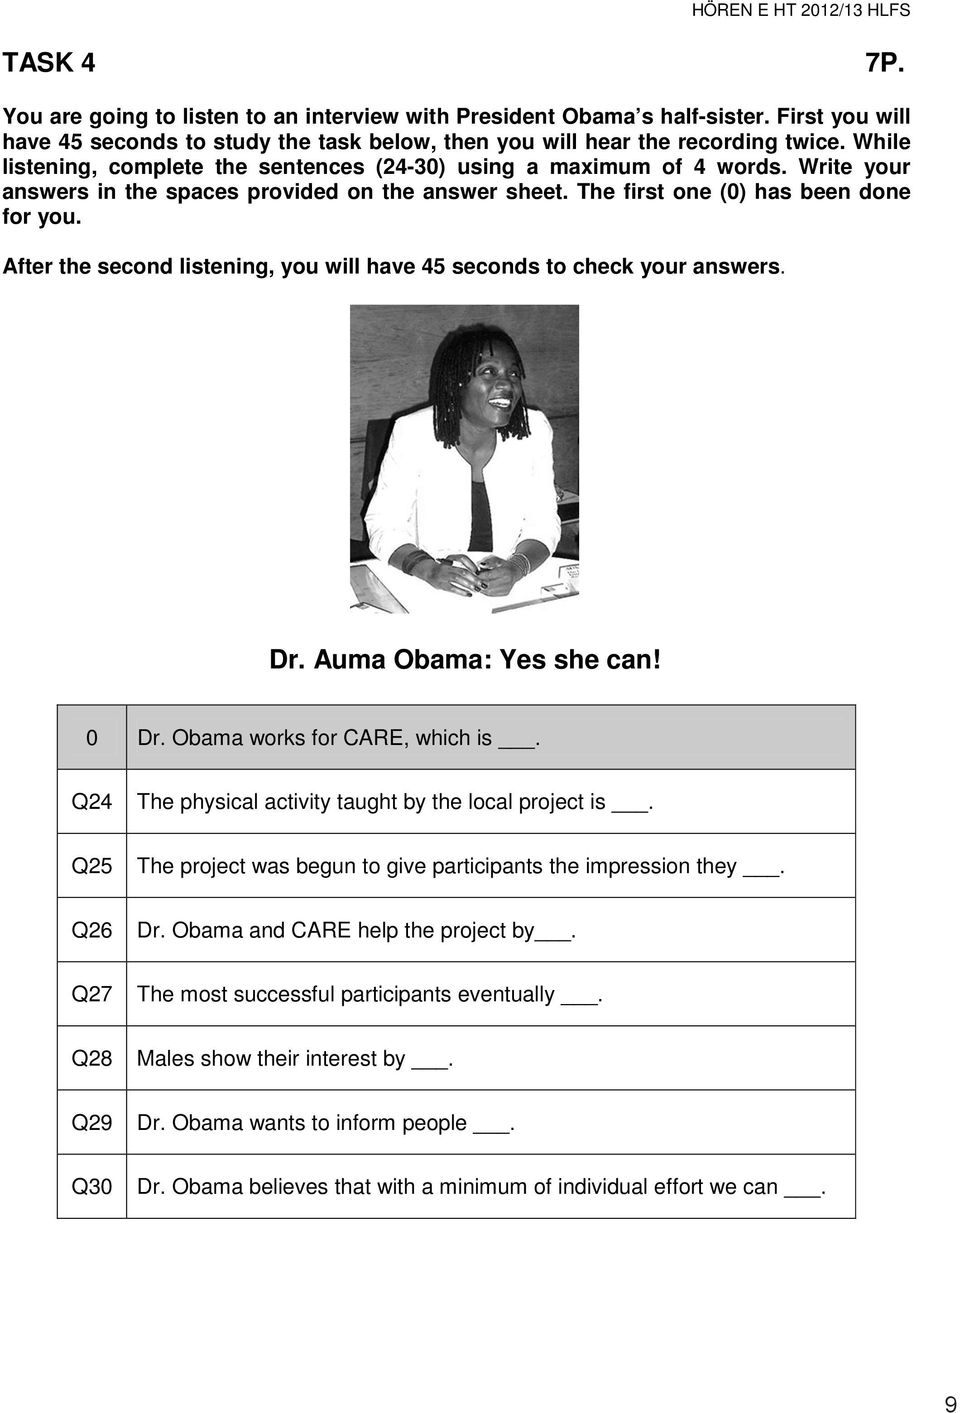 After the second listening, you will have 45 seconds to check your answers. Dr. Auma Obama: Yes she can! 0 Dr. Obama works for CARE, which is. Q24 The physical activity taught by the local project is.